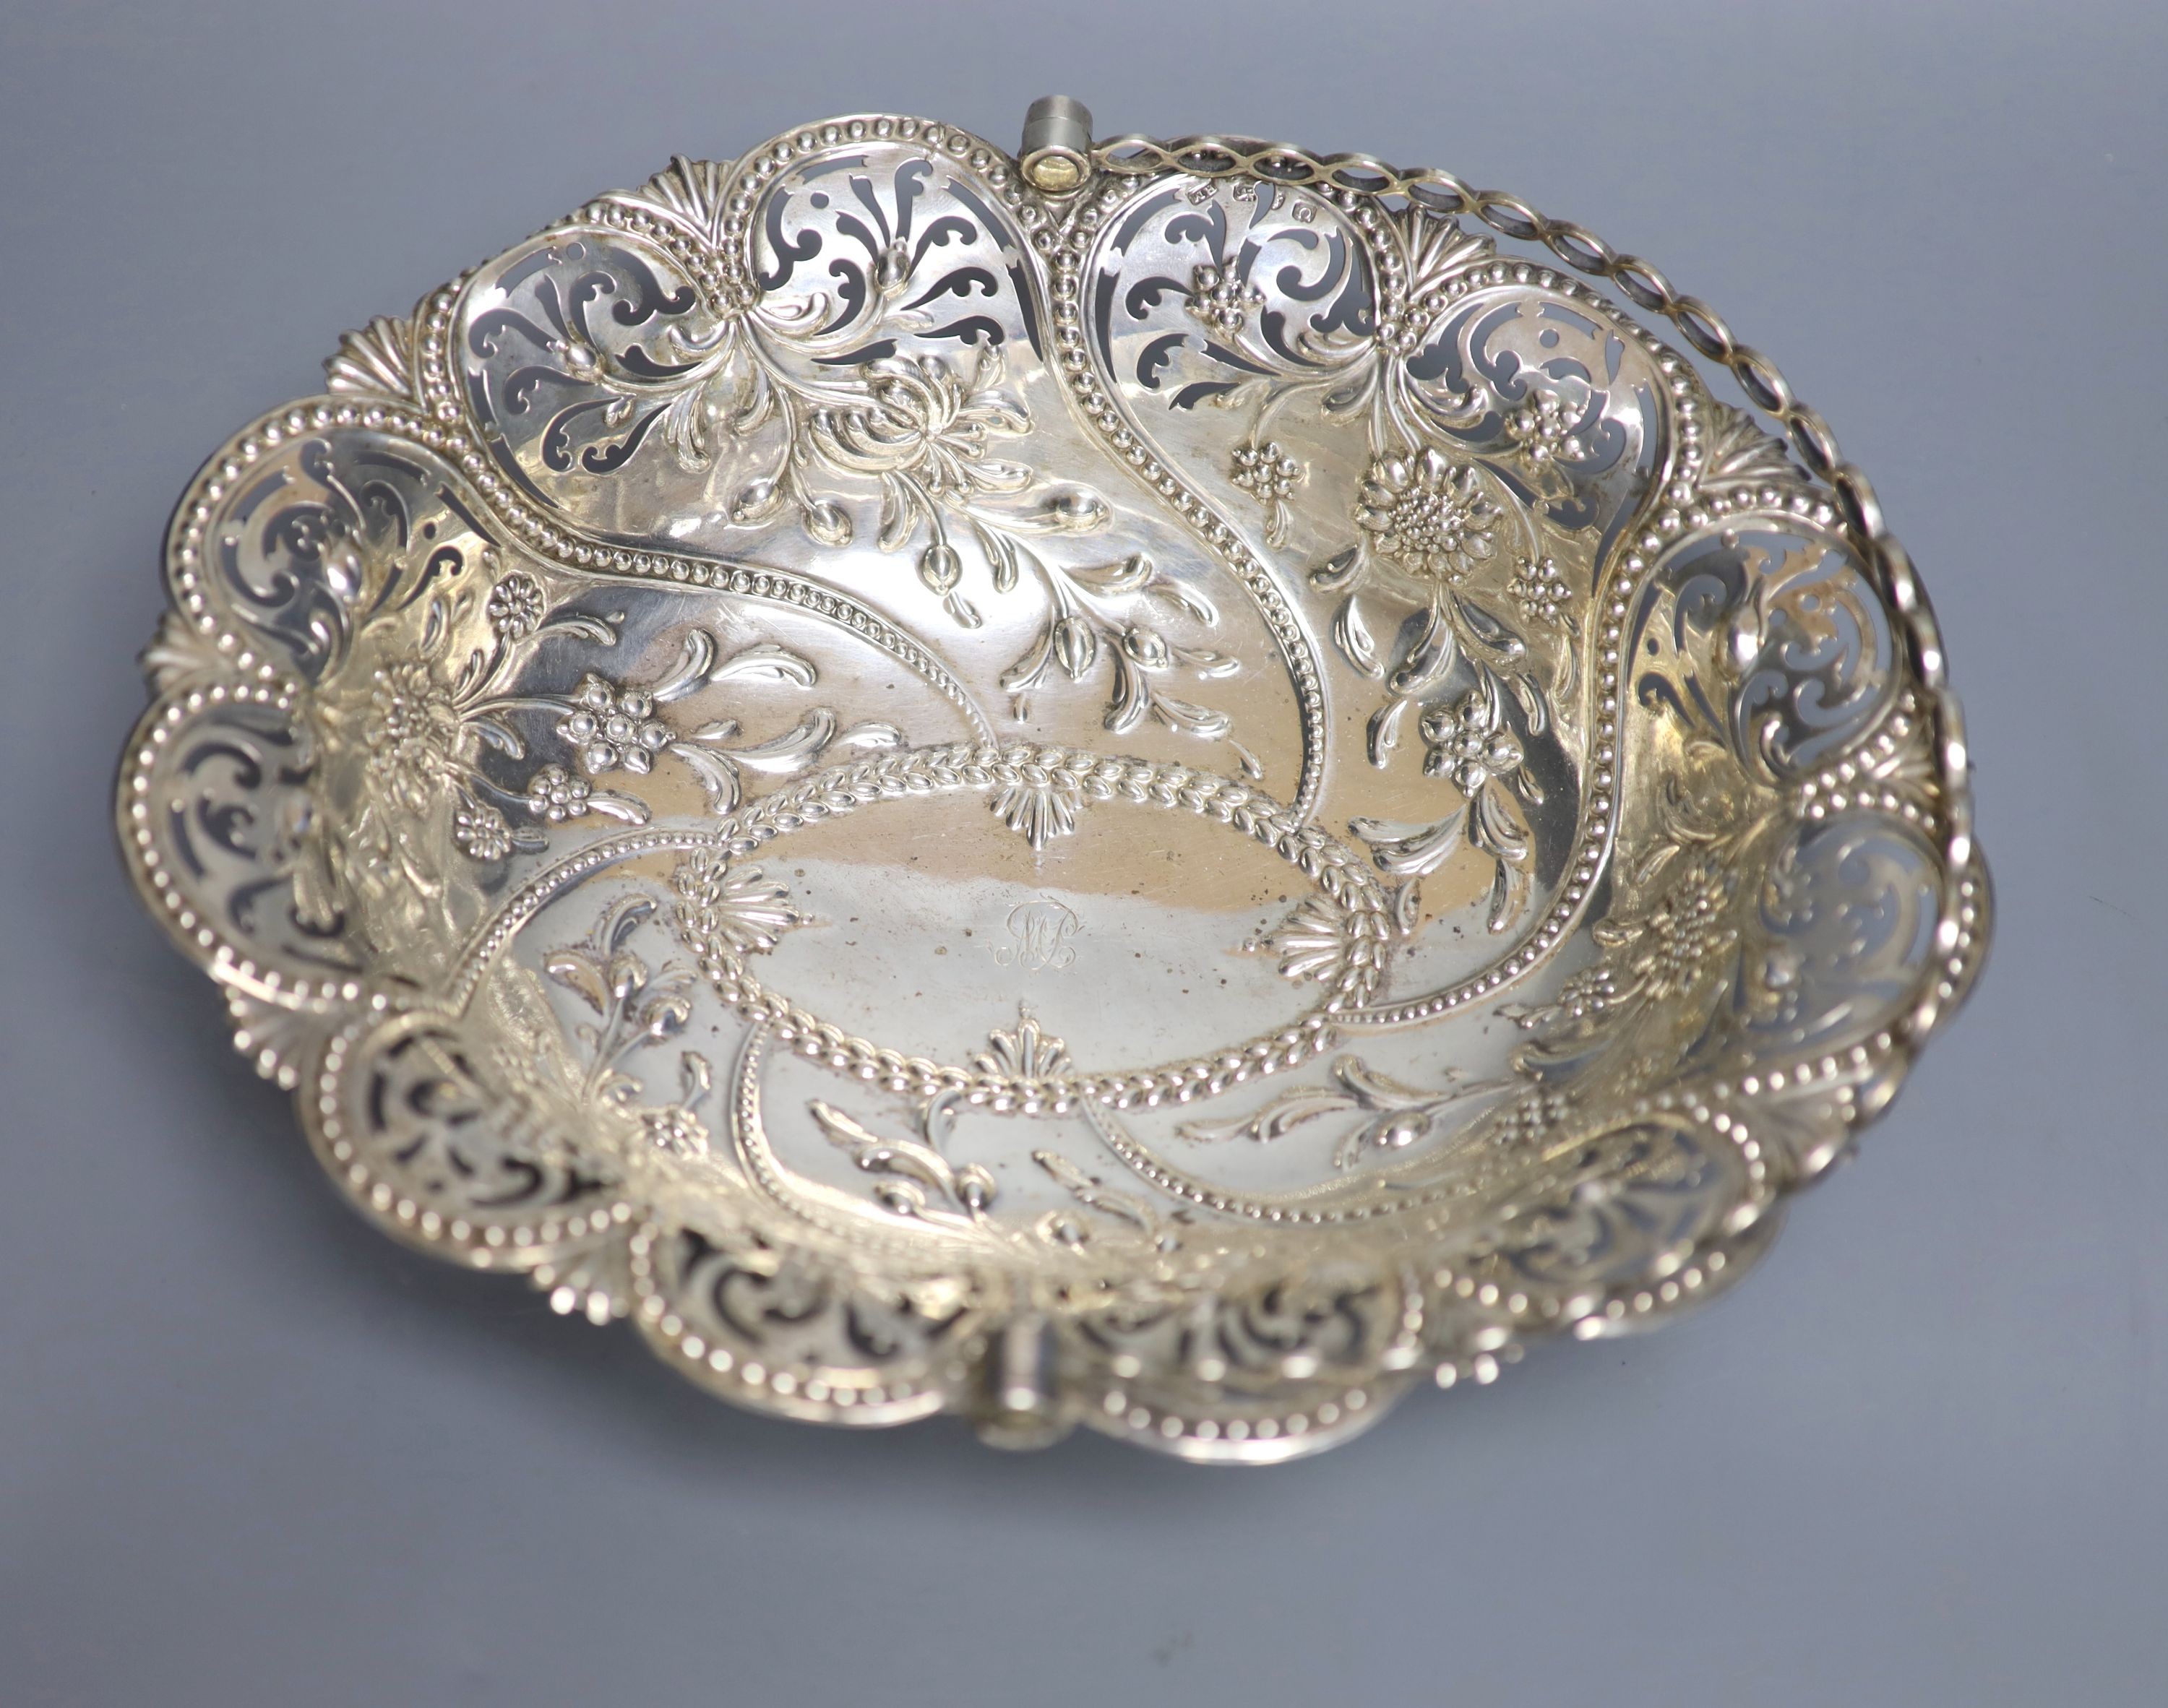 An early George III silver basket, with later? pierced and embossed decoration, Richard Meach, London, 1768, length 30.8cm, 21oz.